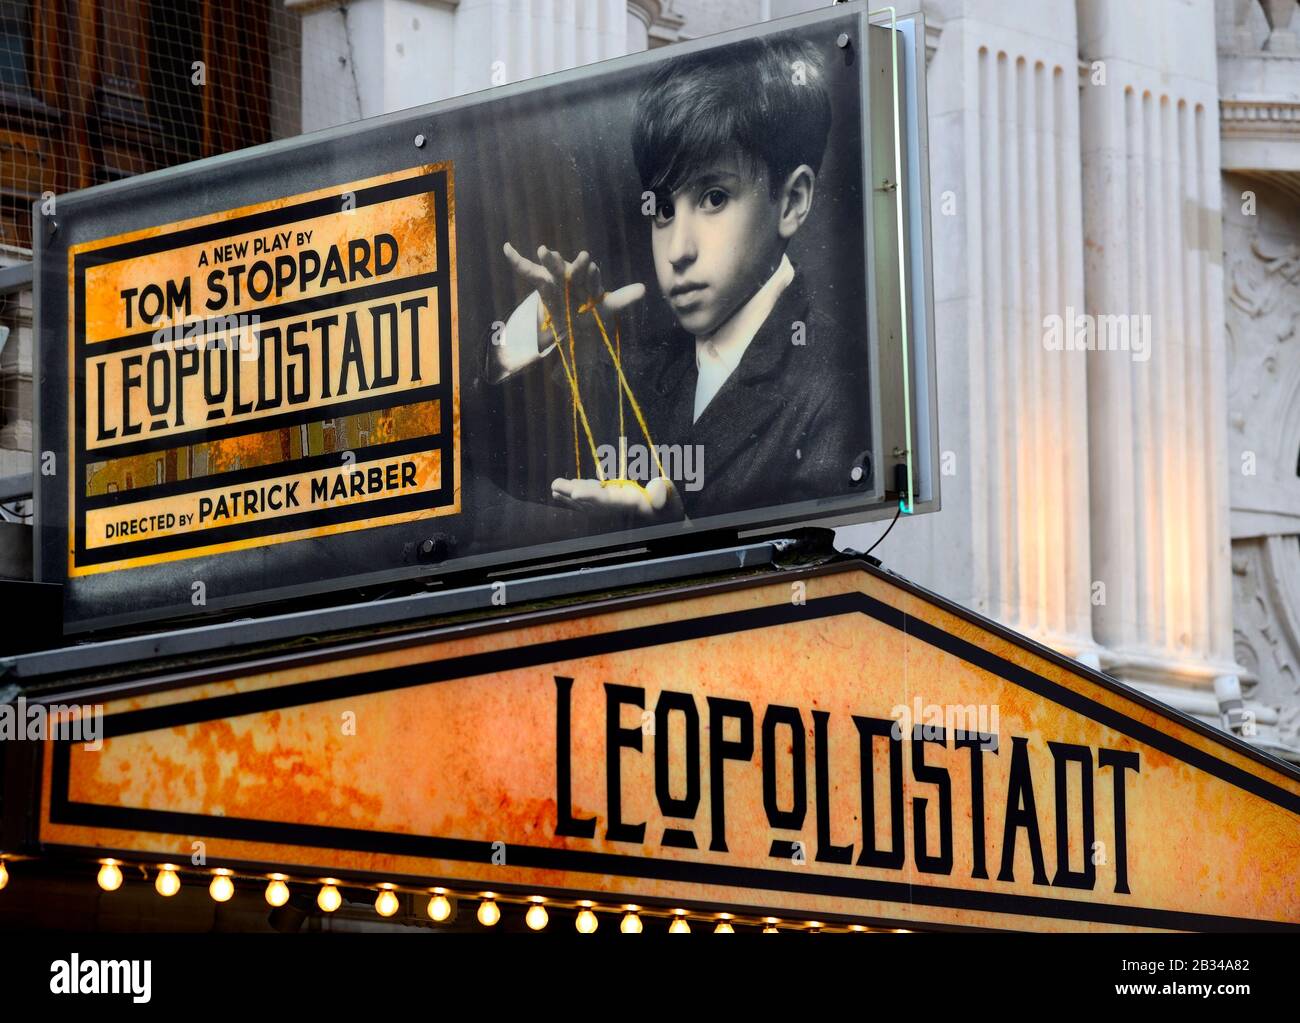 London, England, UK. Tom Stoppard's 'Leopoldstadt' at Wyndam's Theatre, Charing Cross Road (March, 2020) Stock Photo